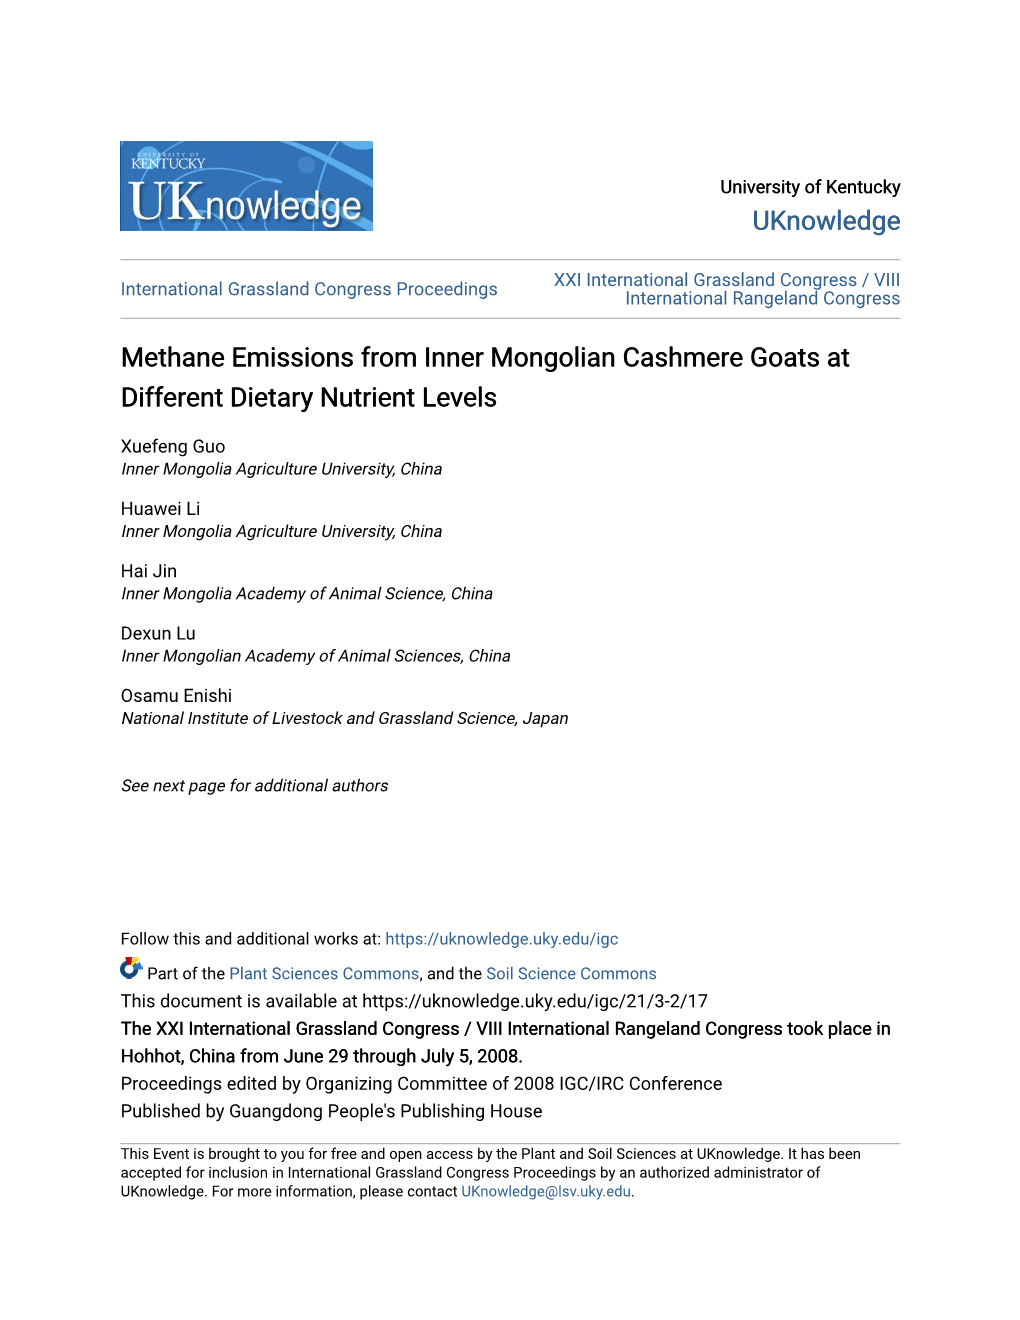 Methane Emissions from Inner Mongolian Cashmere Goats at Different Dietary Nutrient Levels